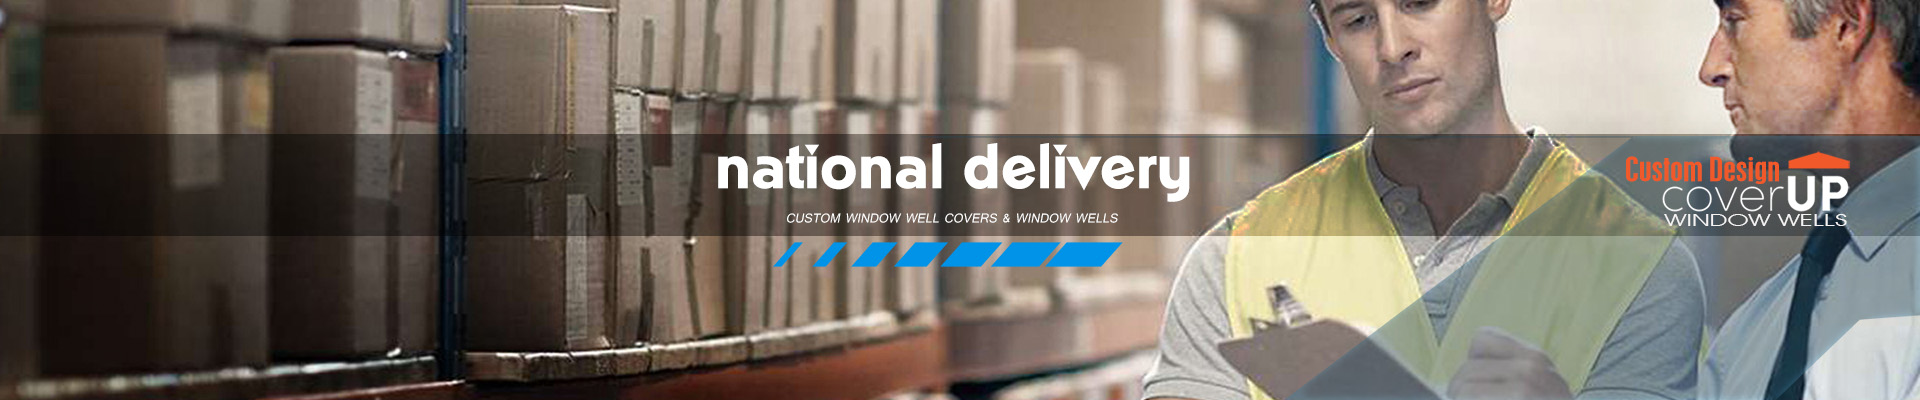 National Delivery by Cover Up Window Well Covers Company